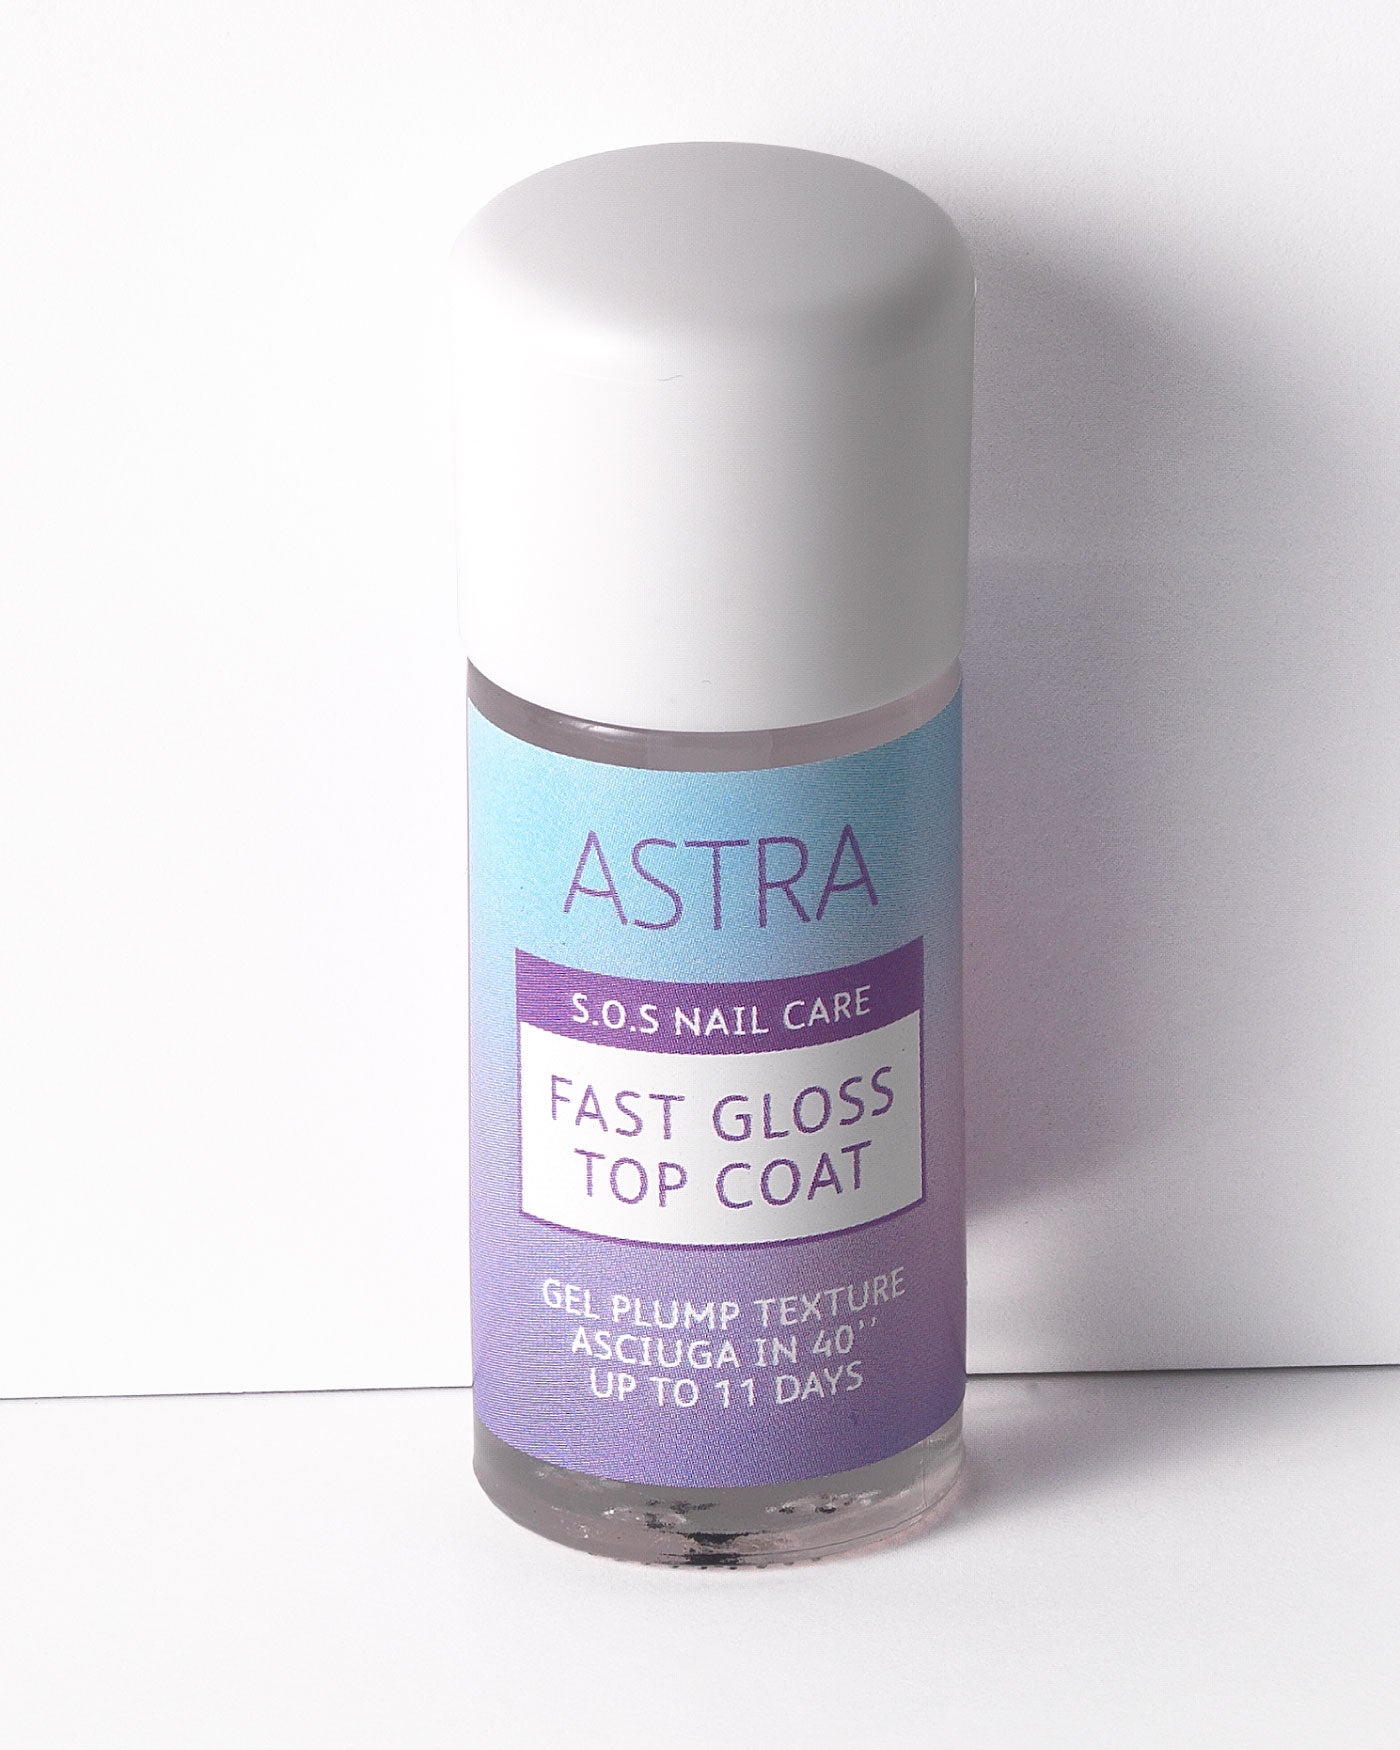 S.O.S NAIL CARE -  FAST GLOSS TOP COAT - All Products - Astra Make-Up